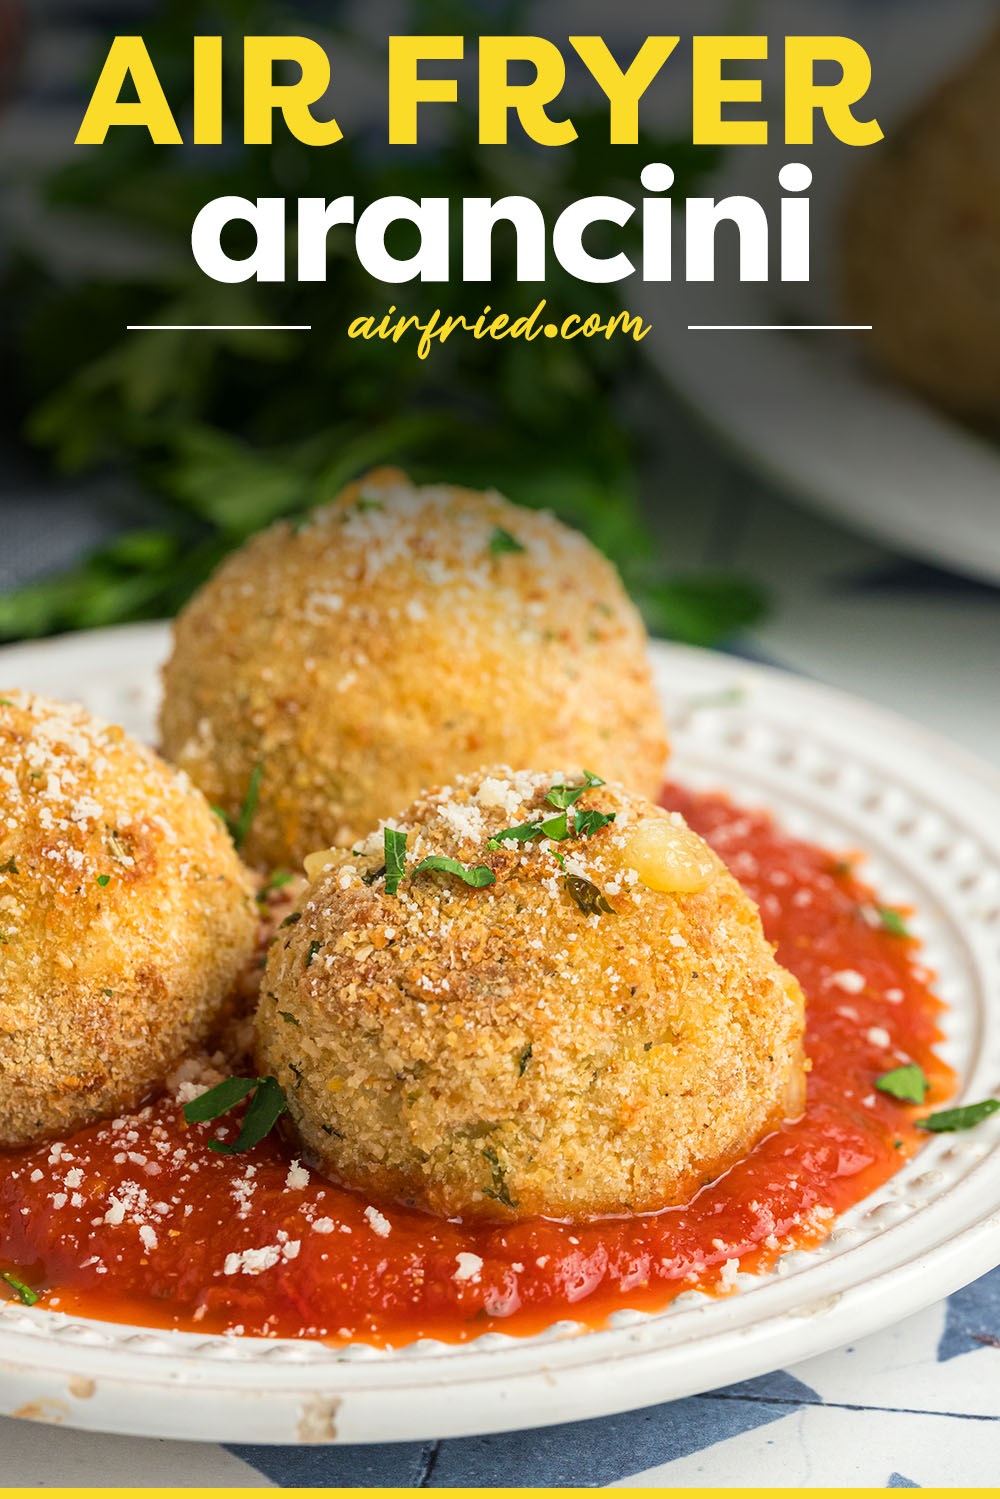 Our air fryer arancini has a ton of flavor in a crispy shell!  The rice is soft and fluffy with perfectly melted cheese in the middle!